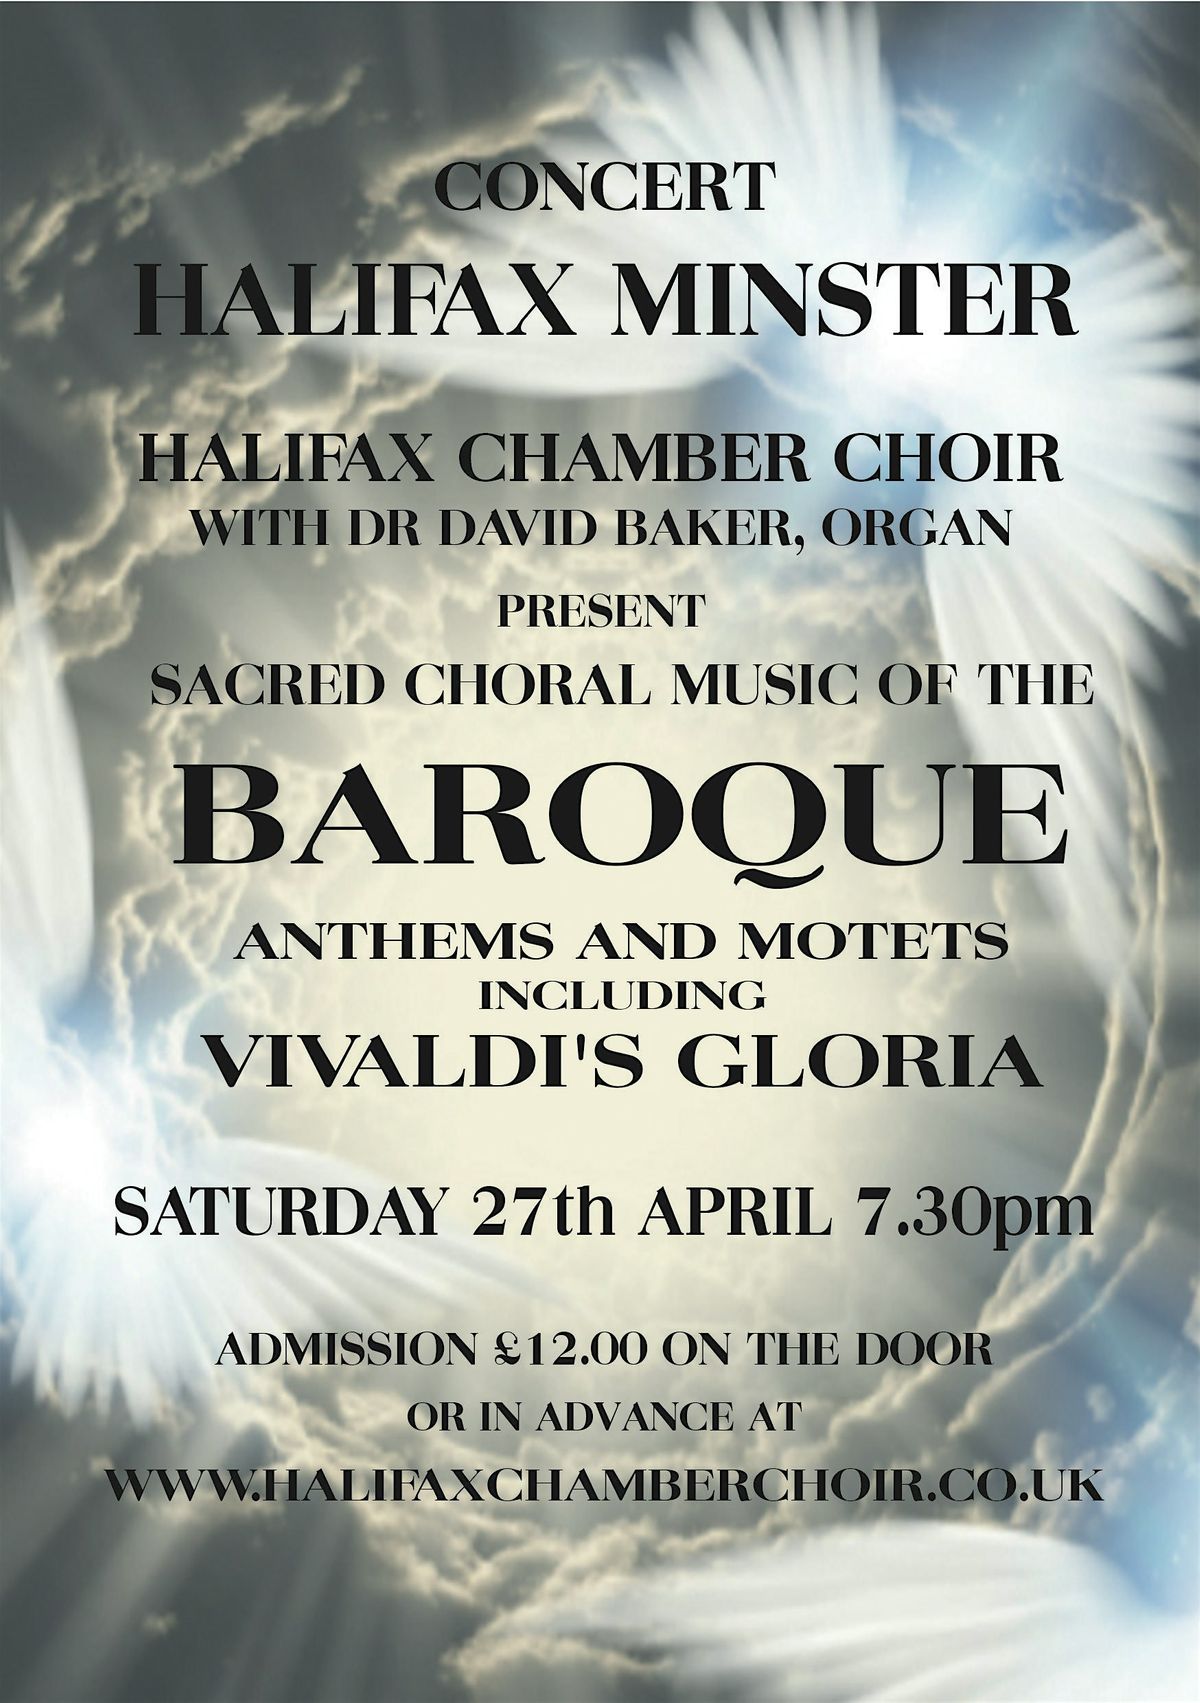 SACRED CHORAL MUSIC OF THE BAROQUE  INCLUDING VIVALDI'S  GLORIA